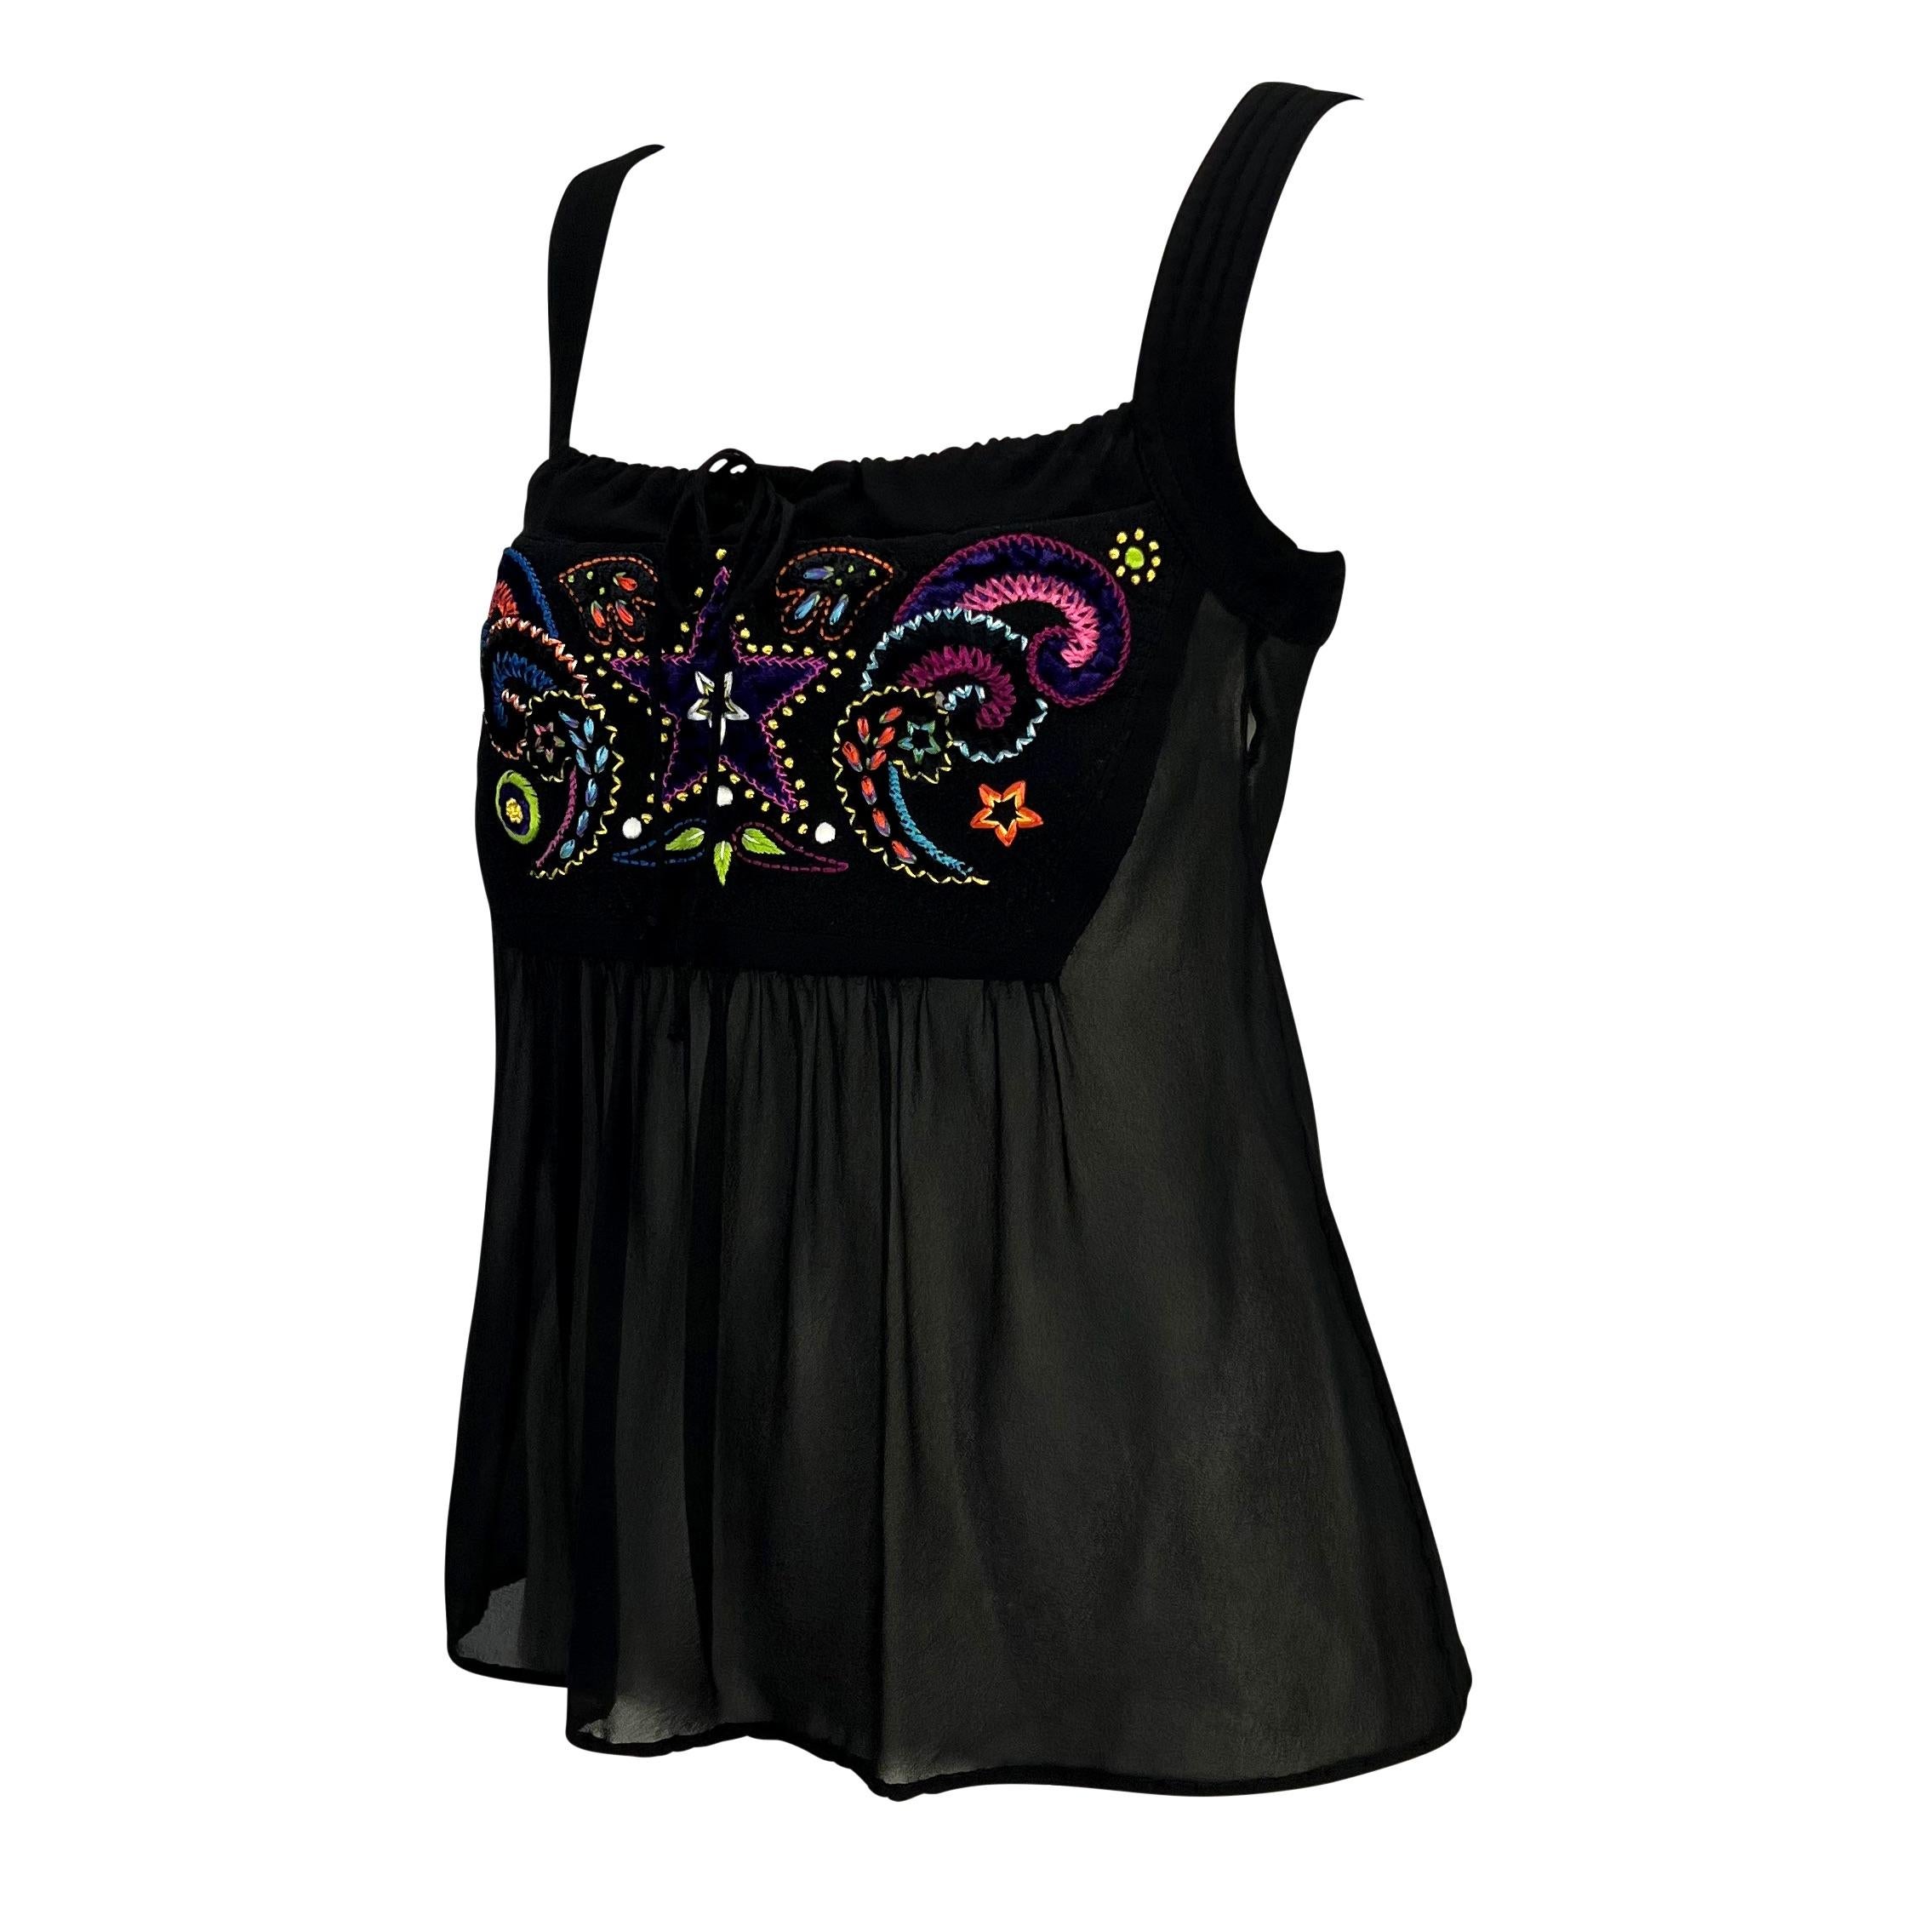 embroidered babydoll tank top by love on a hanger